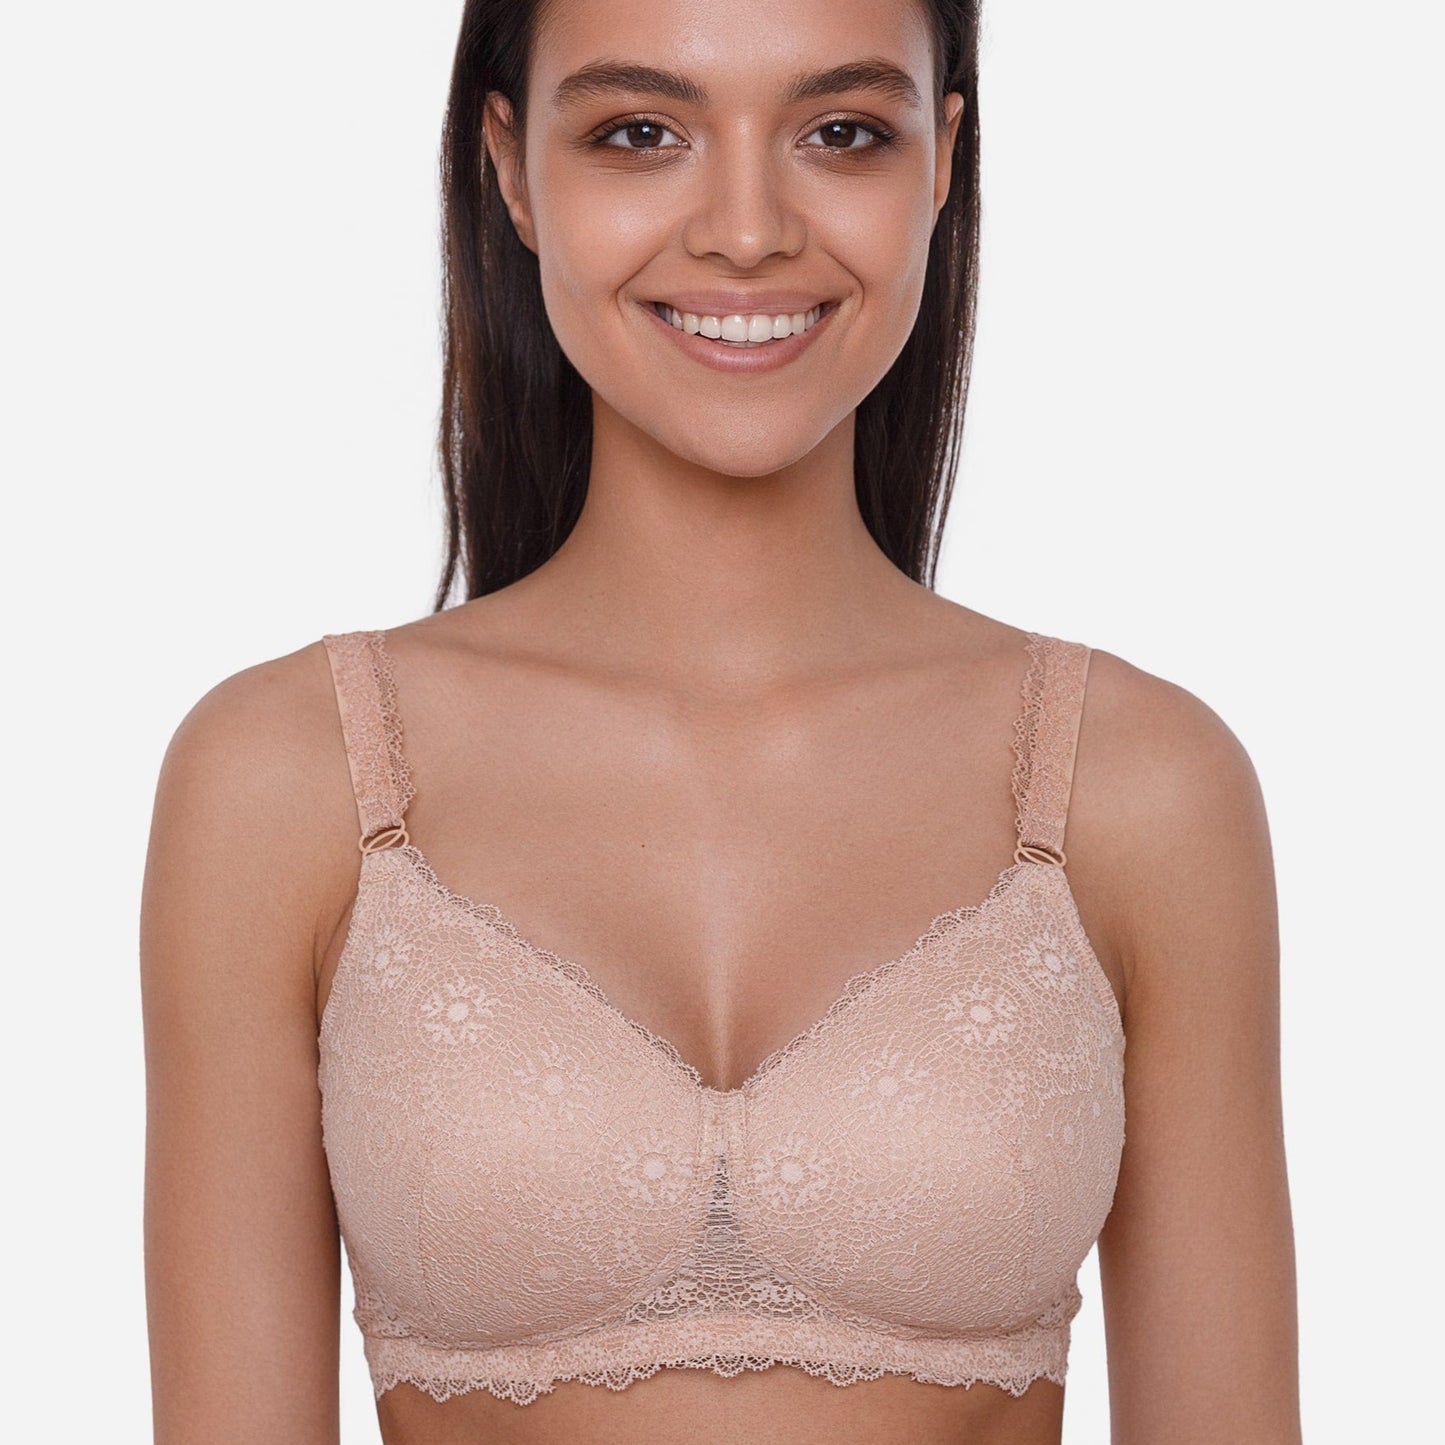 The Salsa Bra | Fashionable design and flattering silhouettes with all the features needed for post-mastectomy. MEGAMI lingerie at Bra Sisters